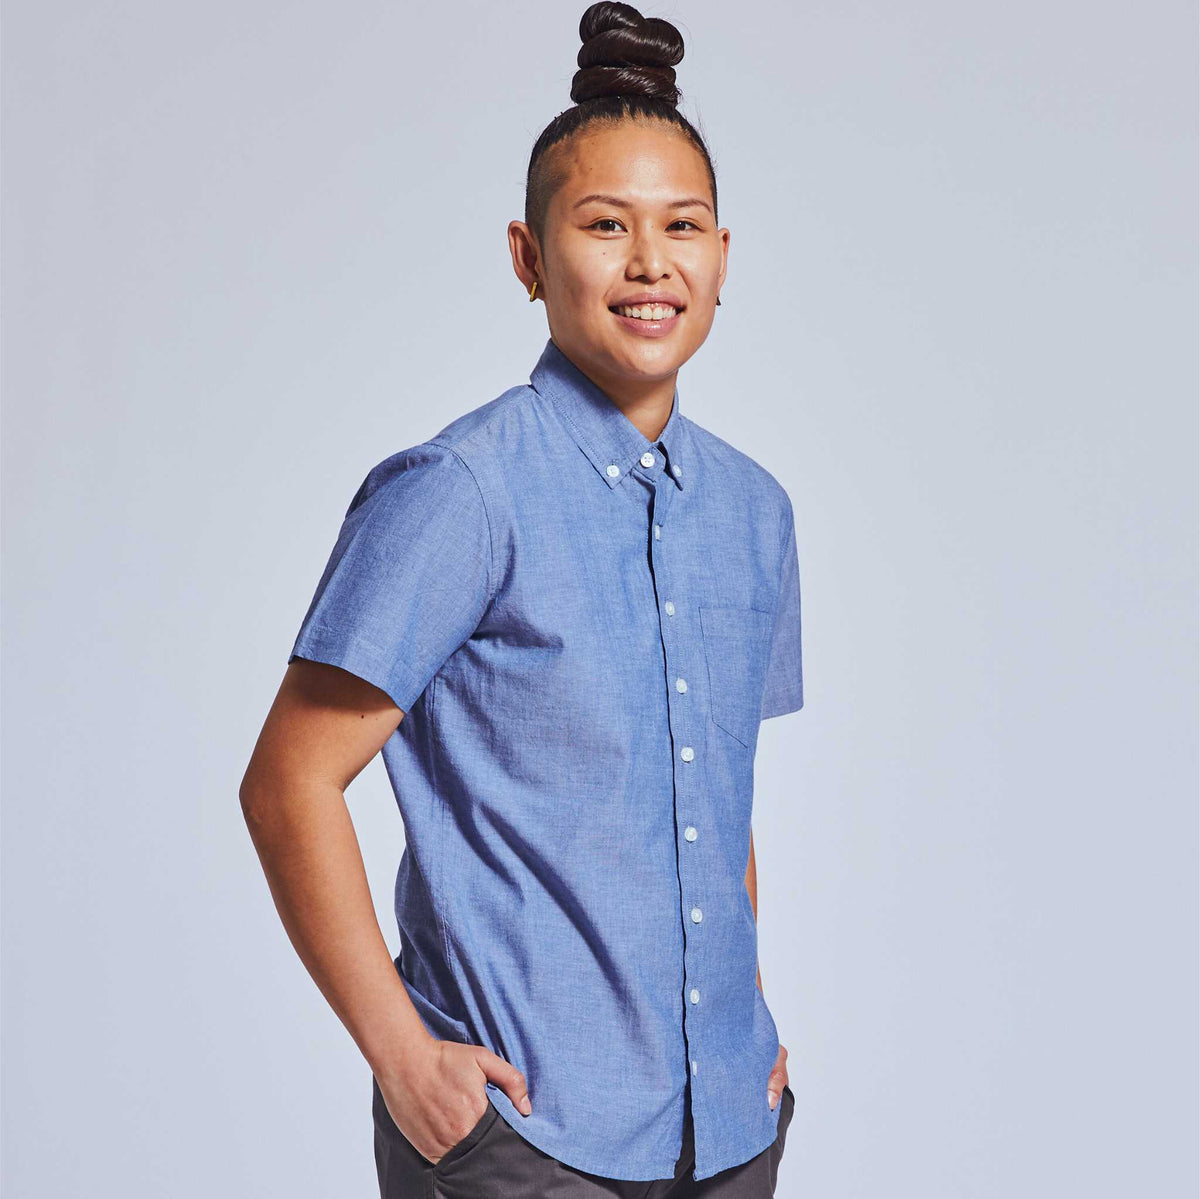 Gil Relaxed Short Sleeve Shirt in Blue Chambray